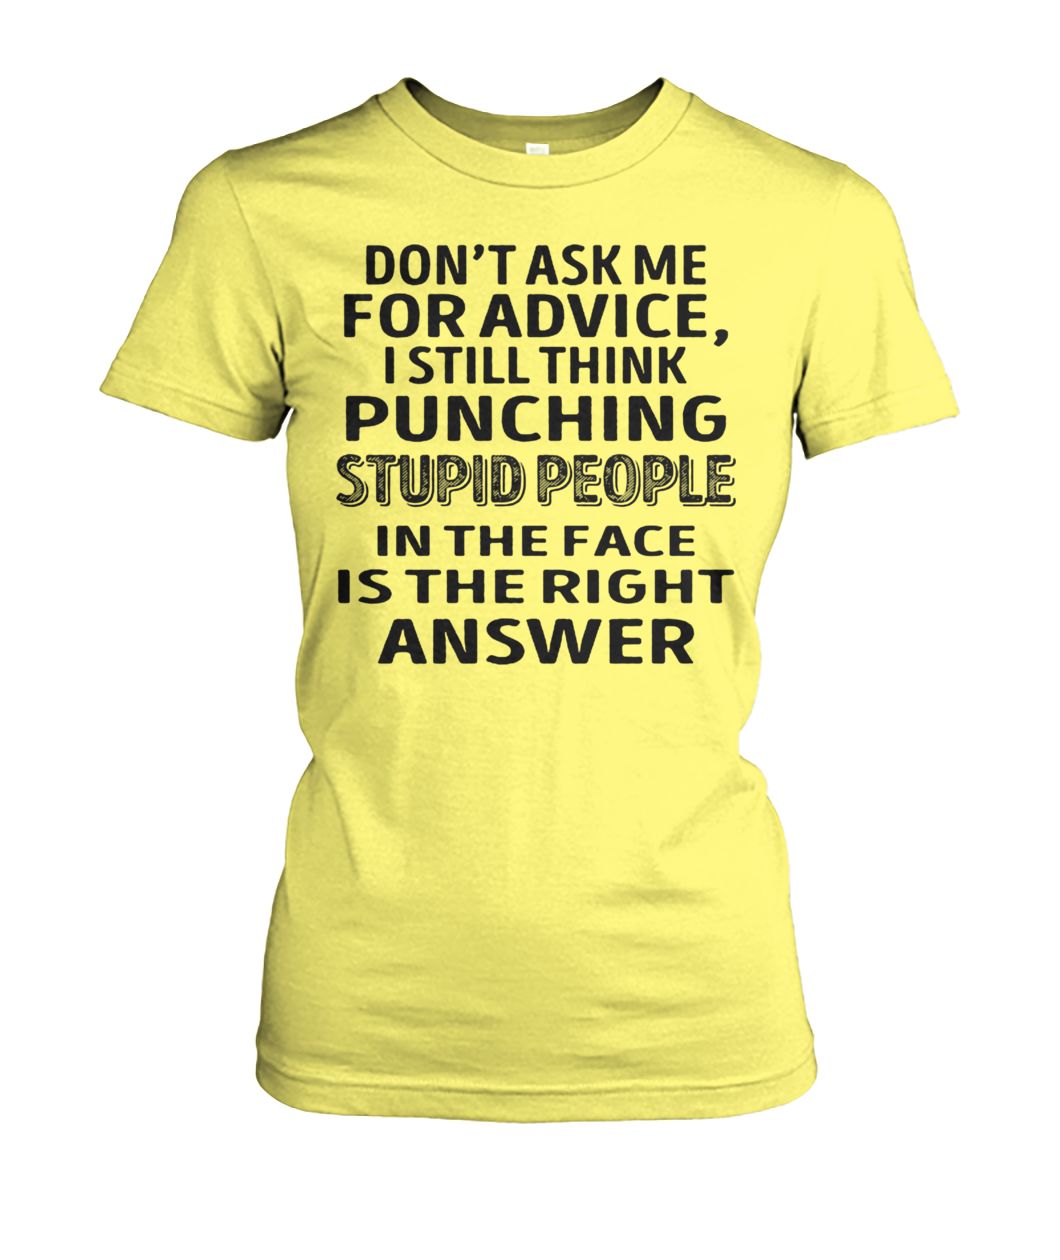 Don't ask me for advice I still think punching stupid people in the face is the right answer women's crew tee